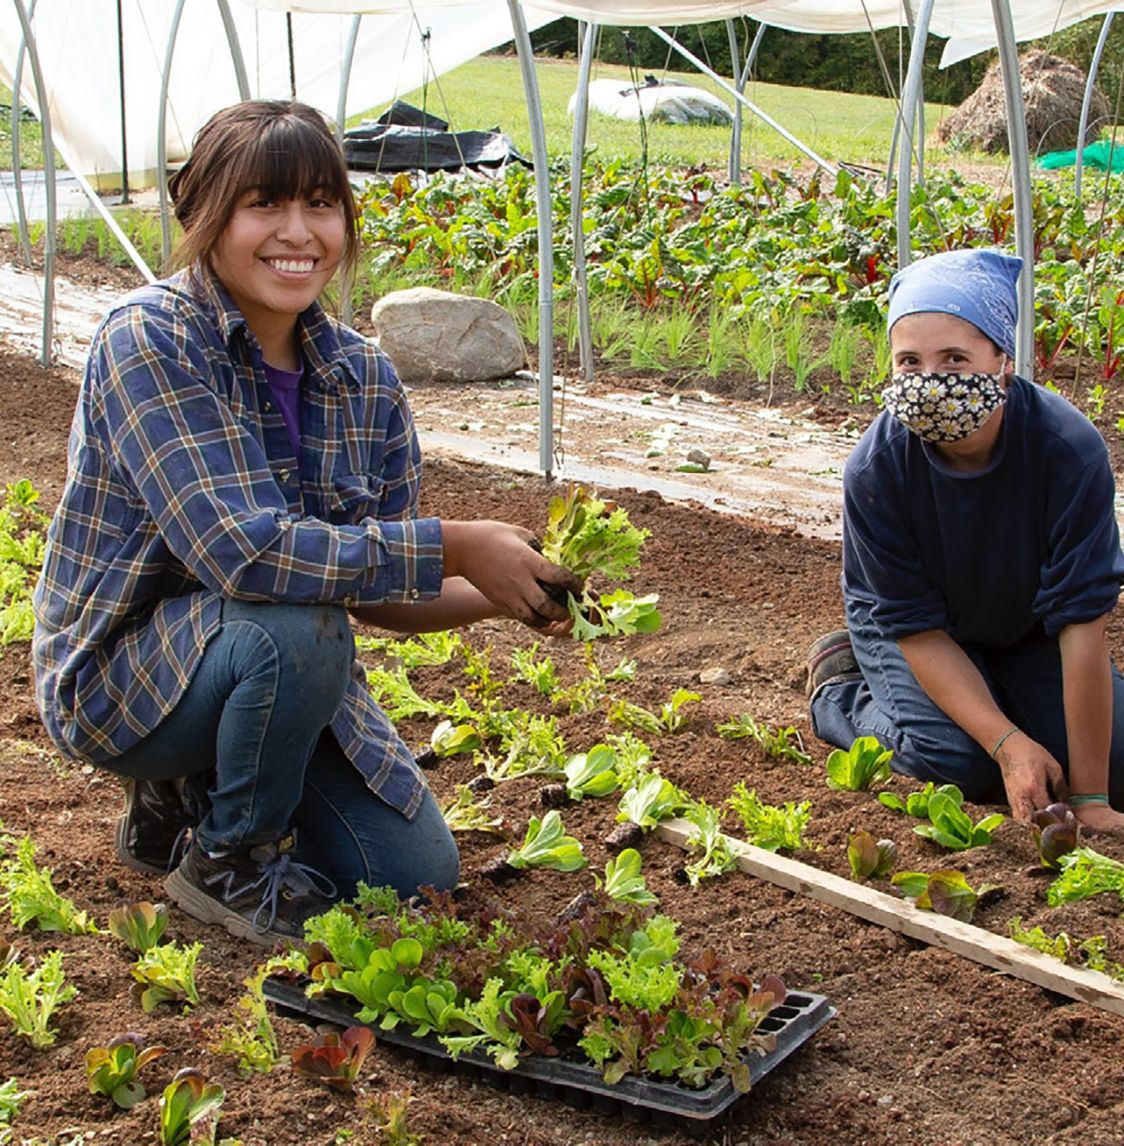 Two women work in a large garden planting.